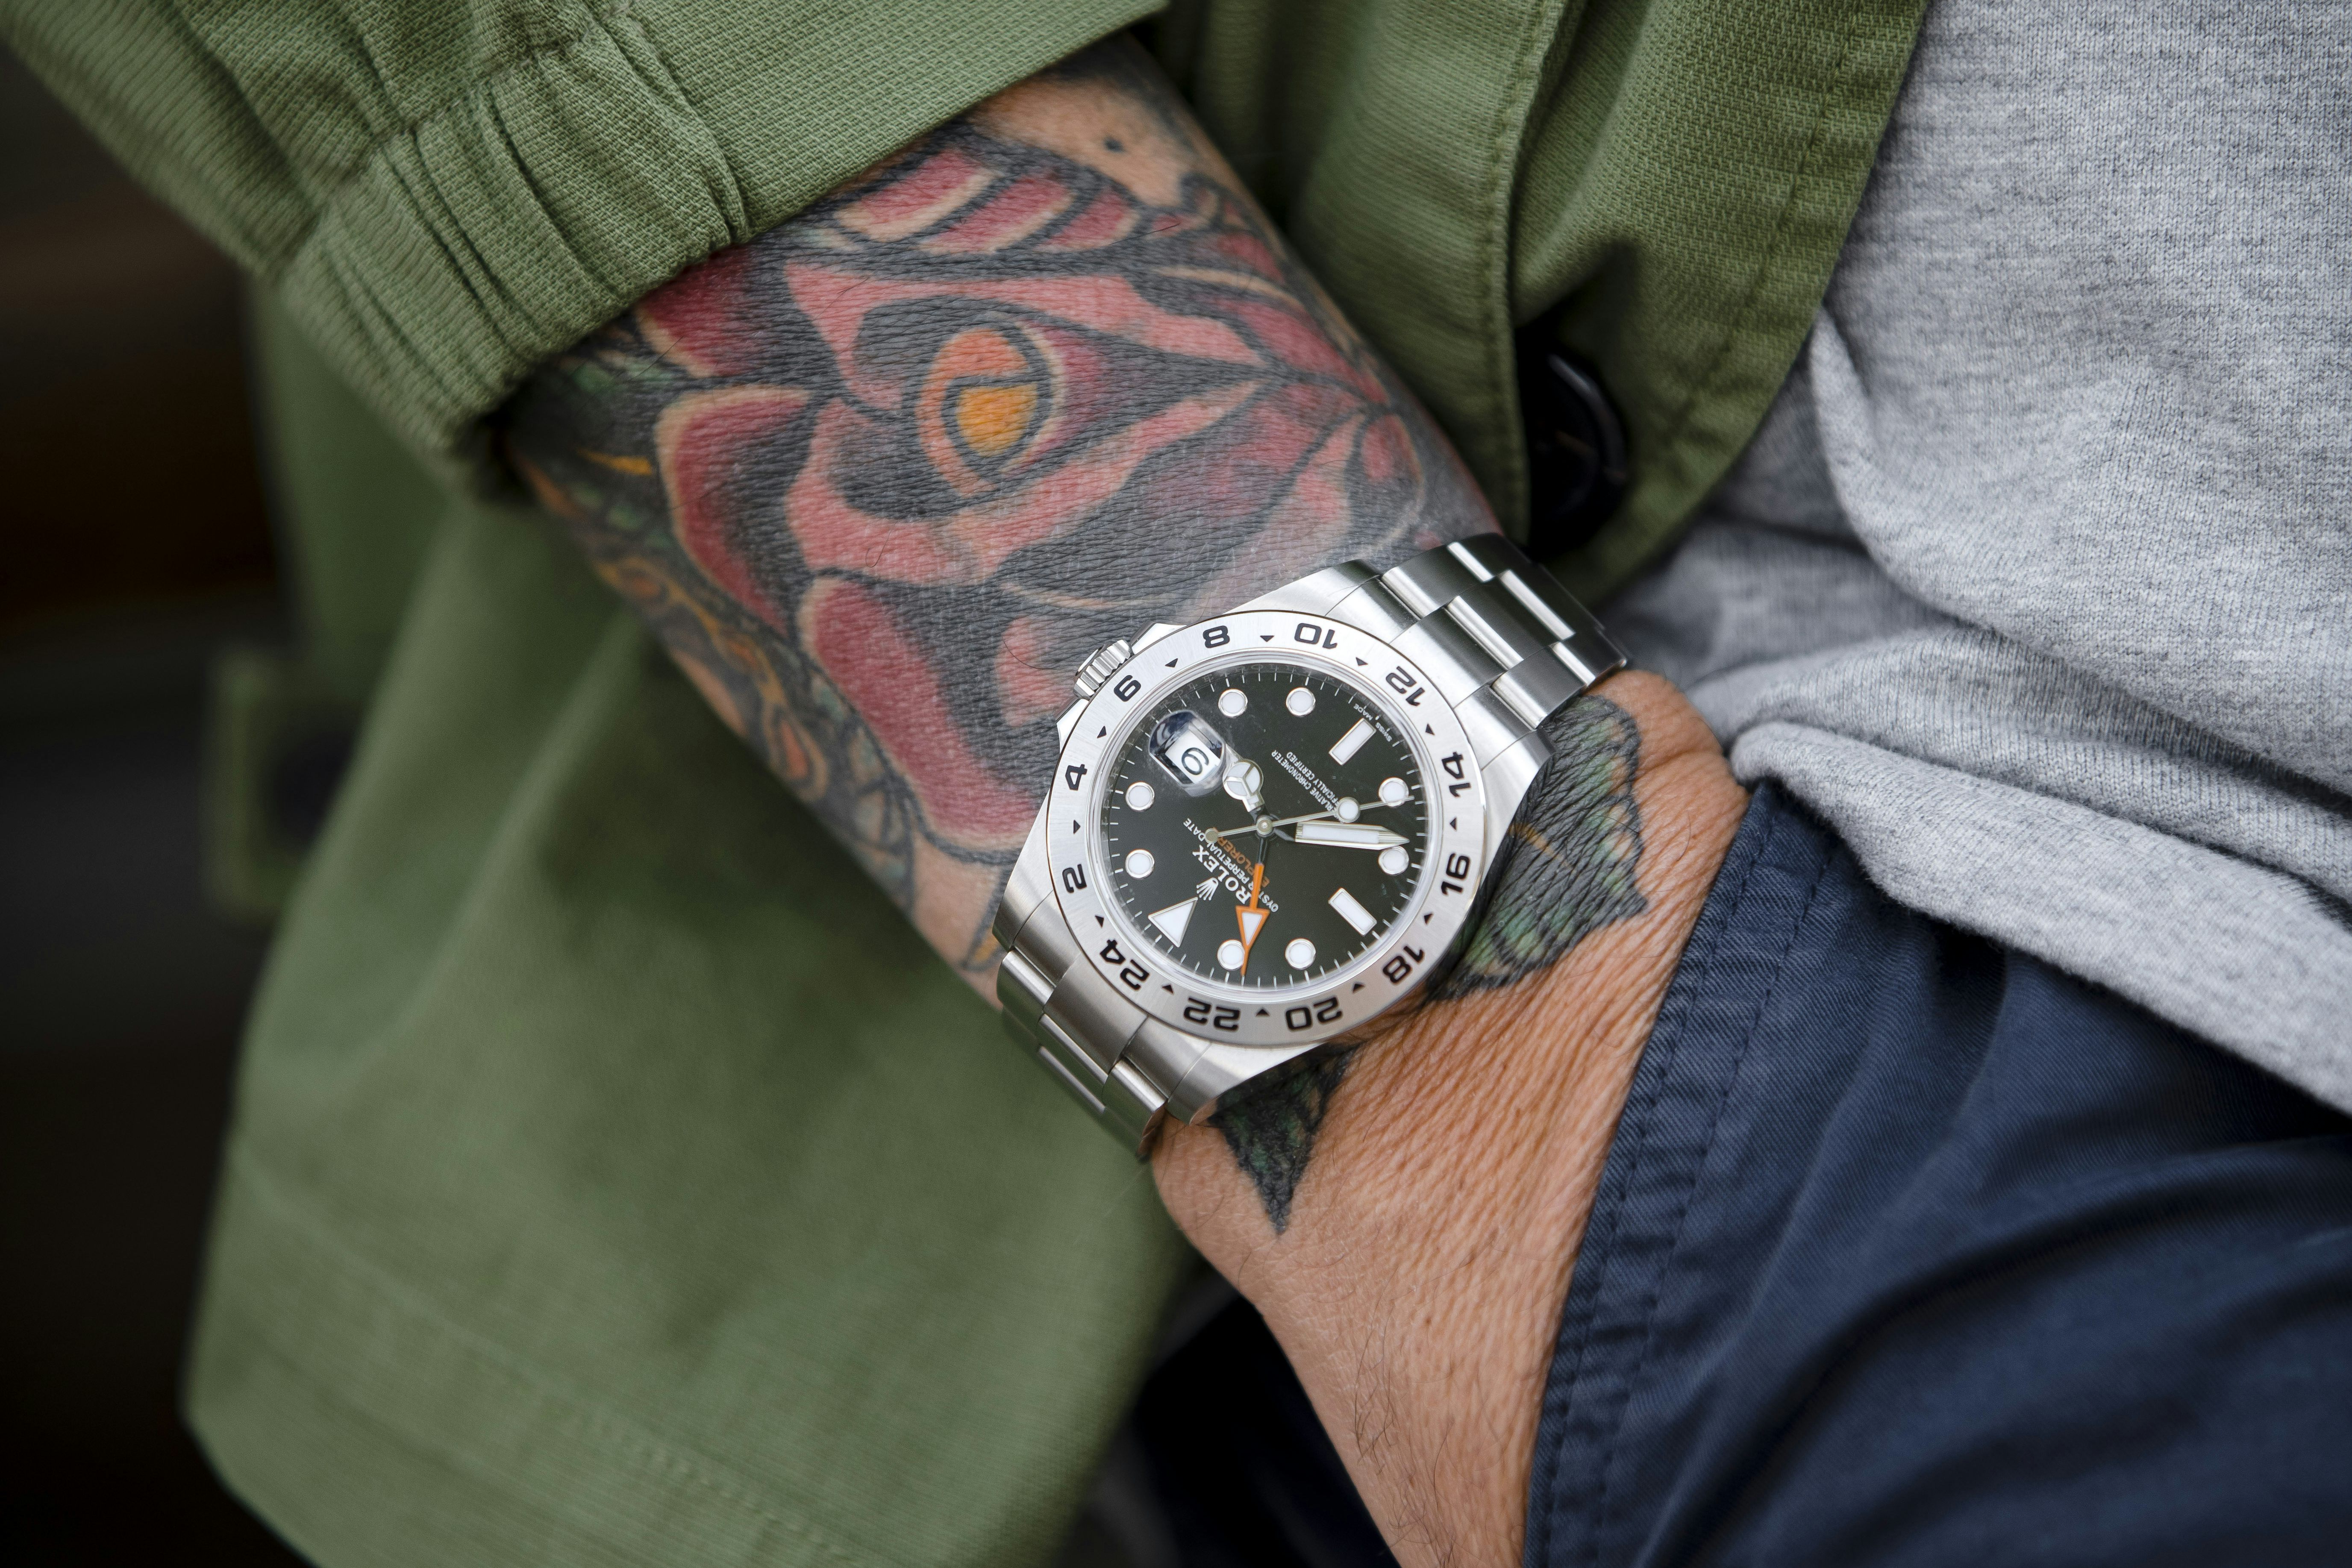 Photo Report: At Uomo - The Show Pitti 45 Street-Style Stole That Hodinkee Watches